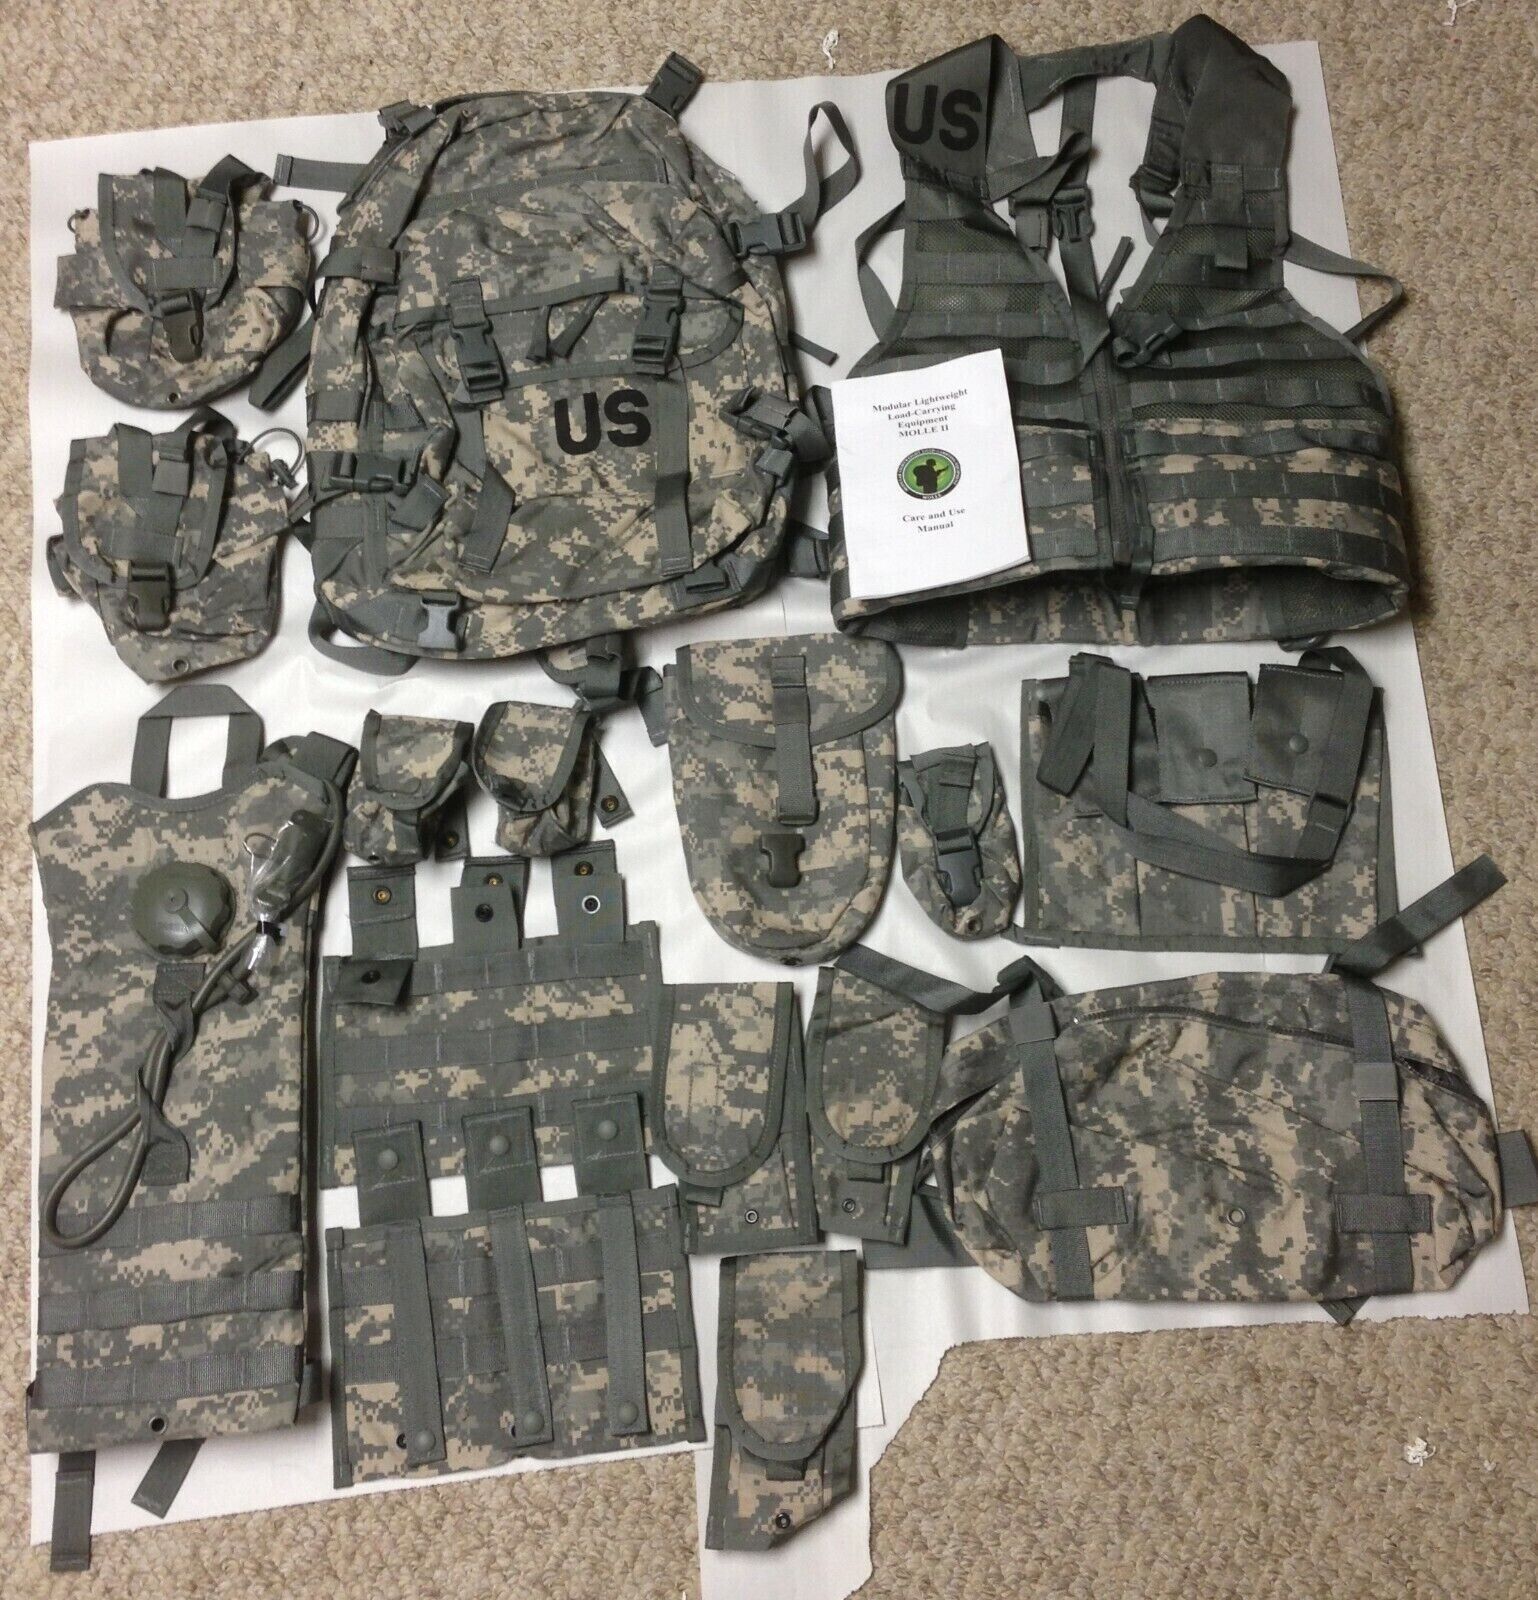 US Army Molle II Rifleman Set 16 Piece Kit ACU Digital Camo new in Packaging.